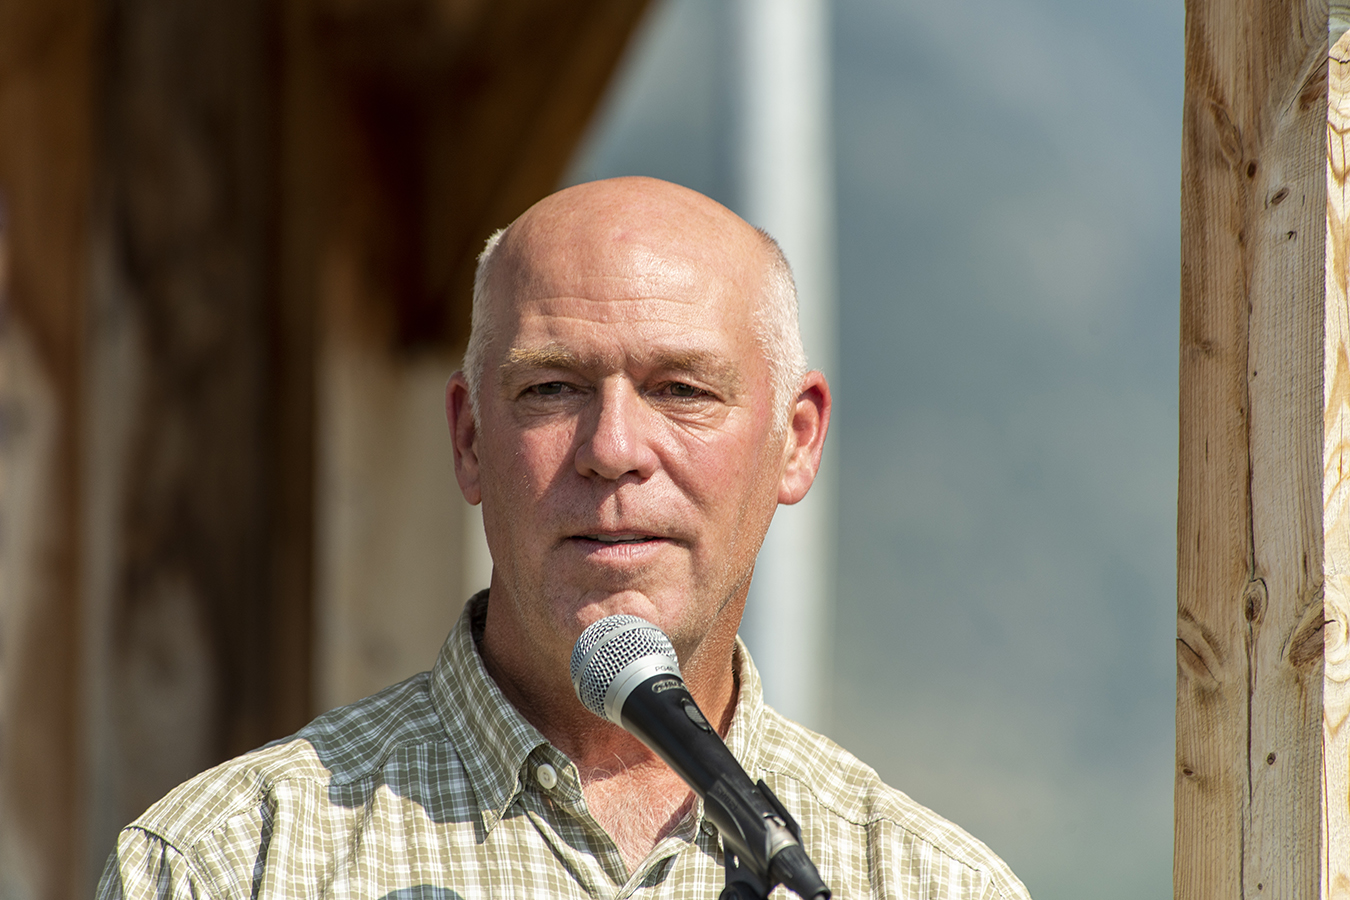 Montana’s Governor Nixed a Kids’ Vaccine Campaign, So Health Officials Plan Their Own